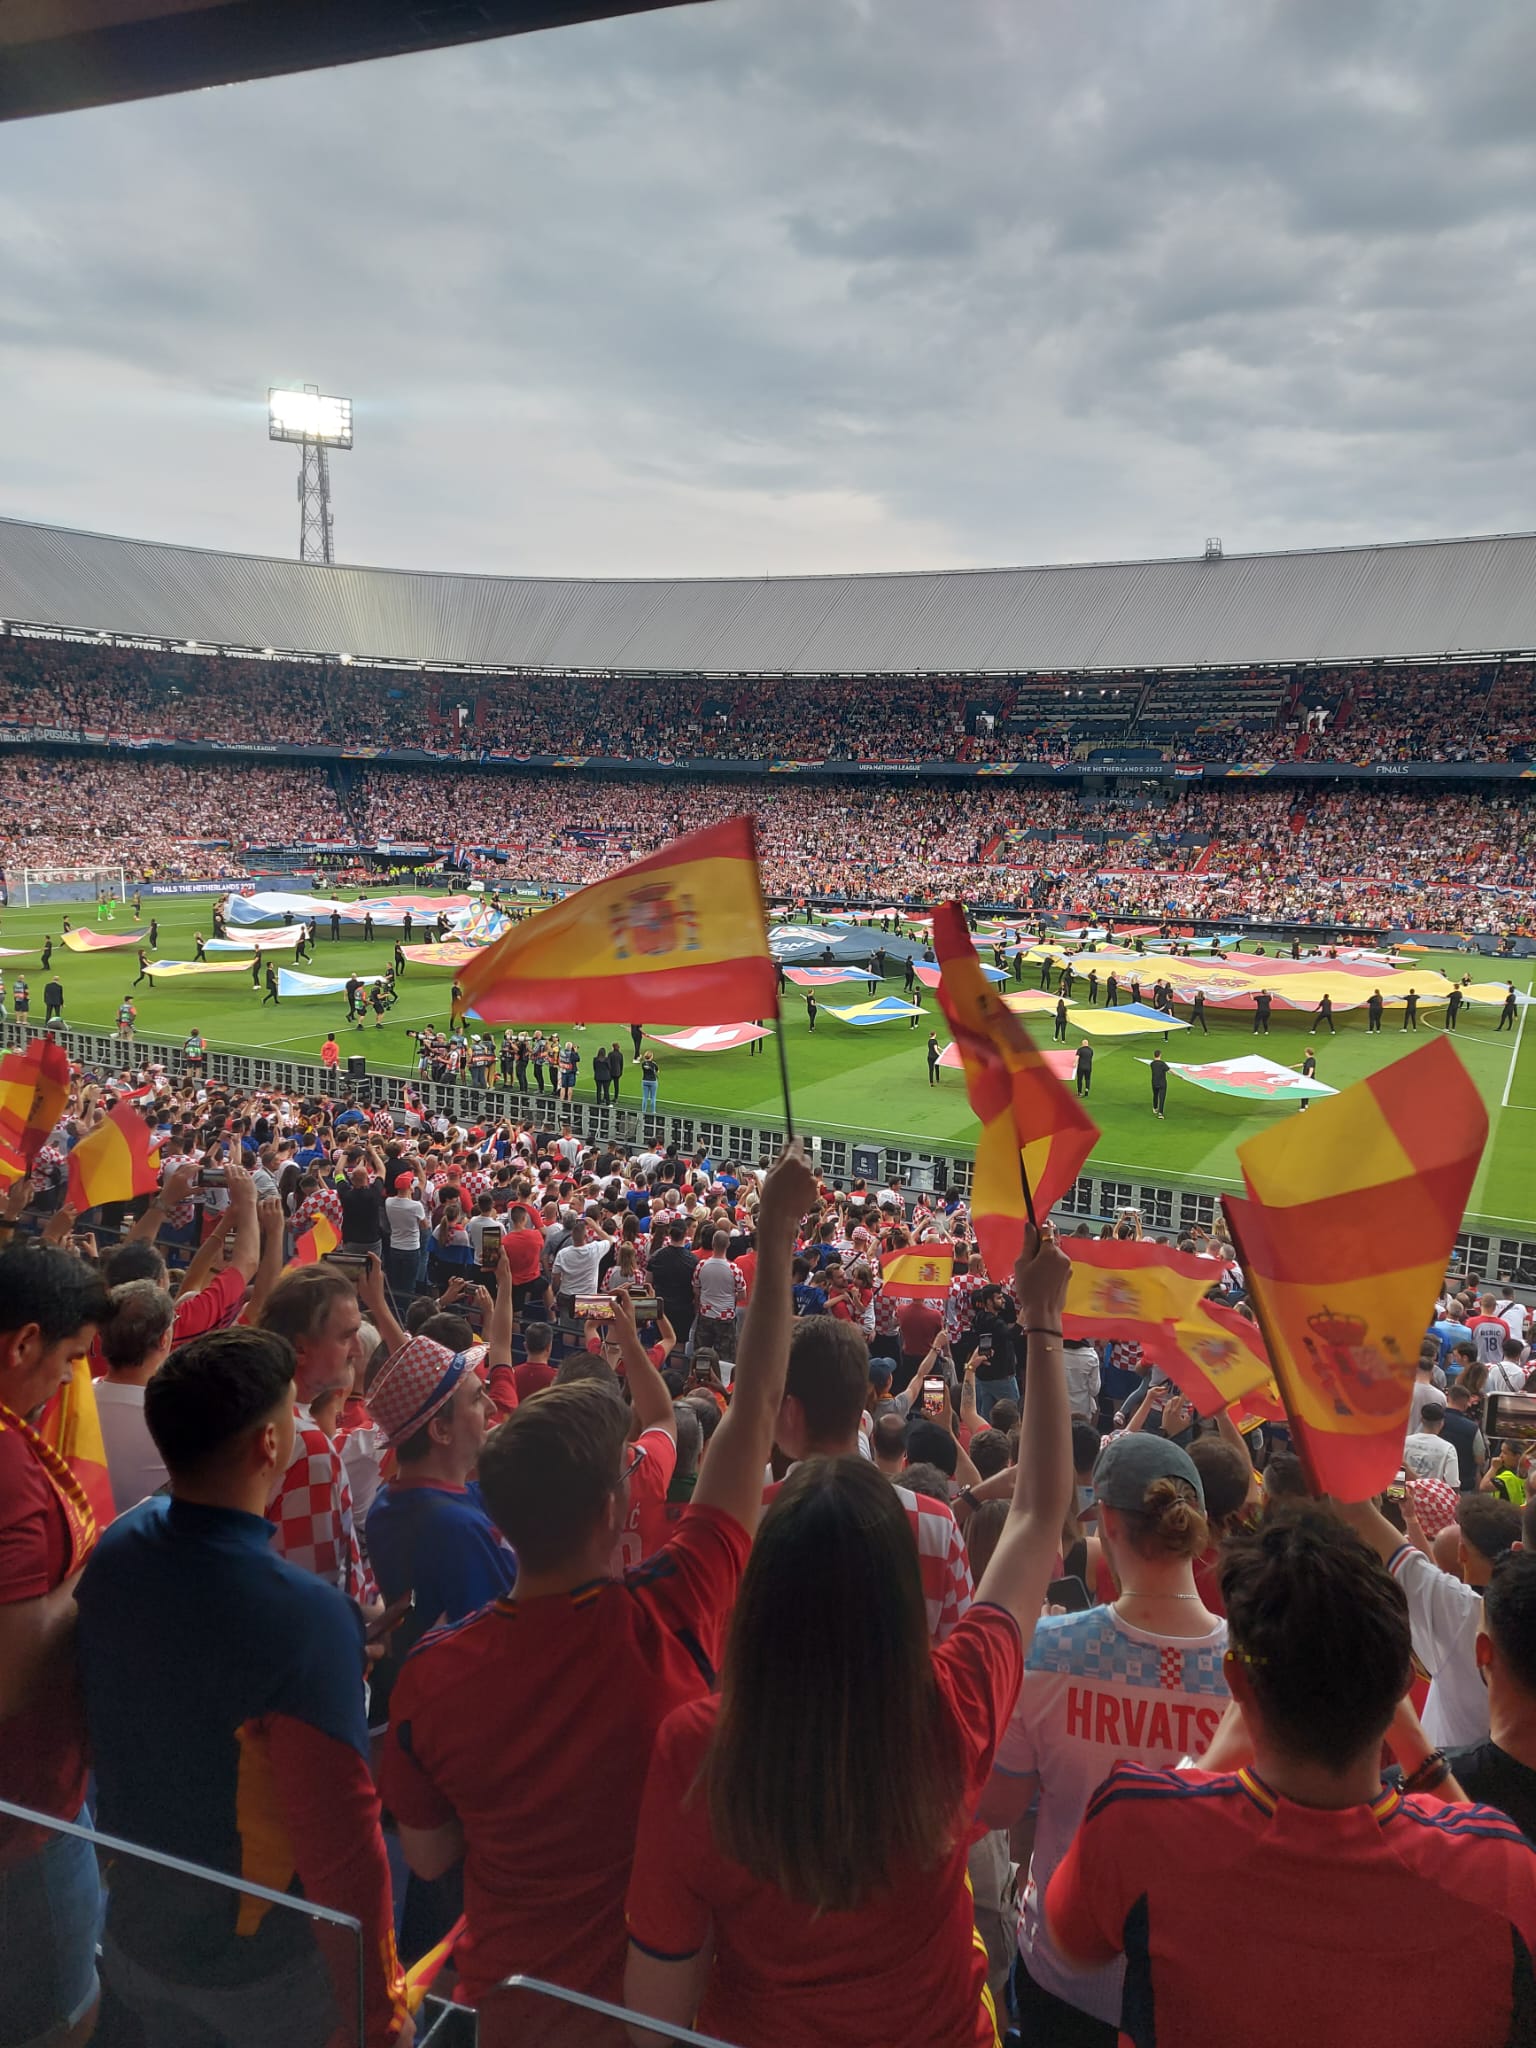 Croatian business visiting The Netherlands for the Nations League Finals!